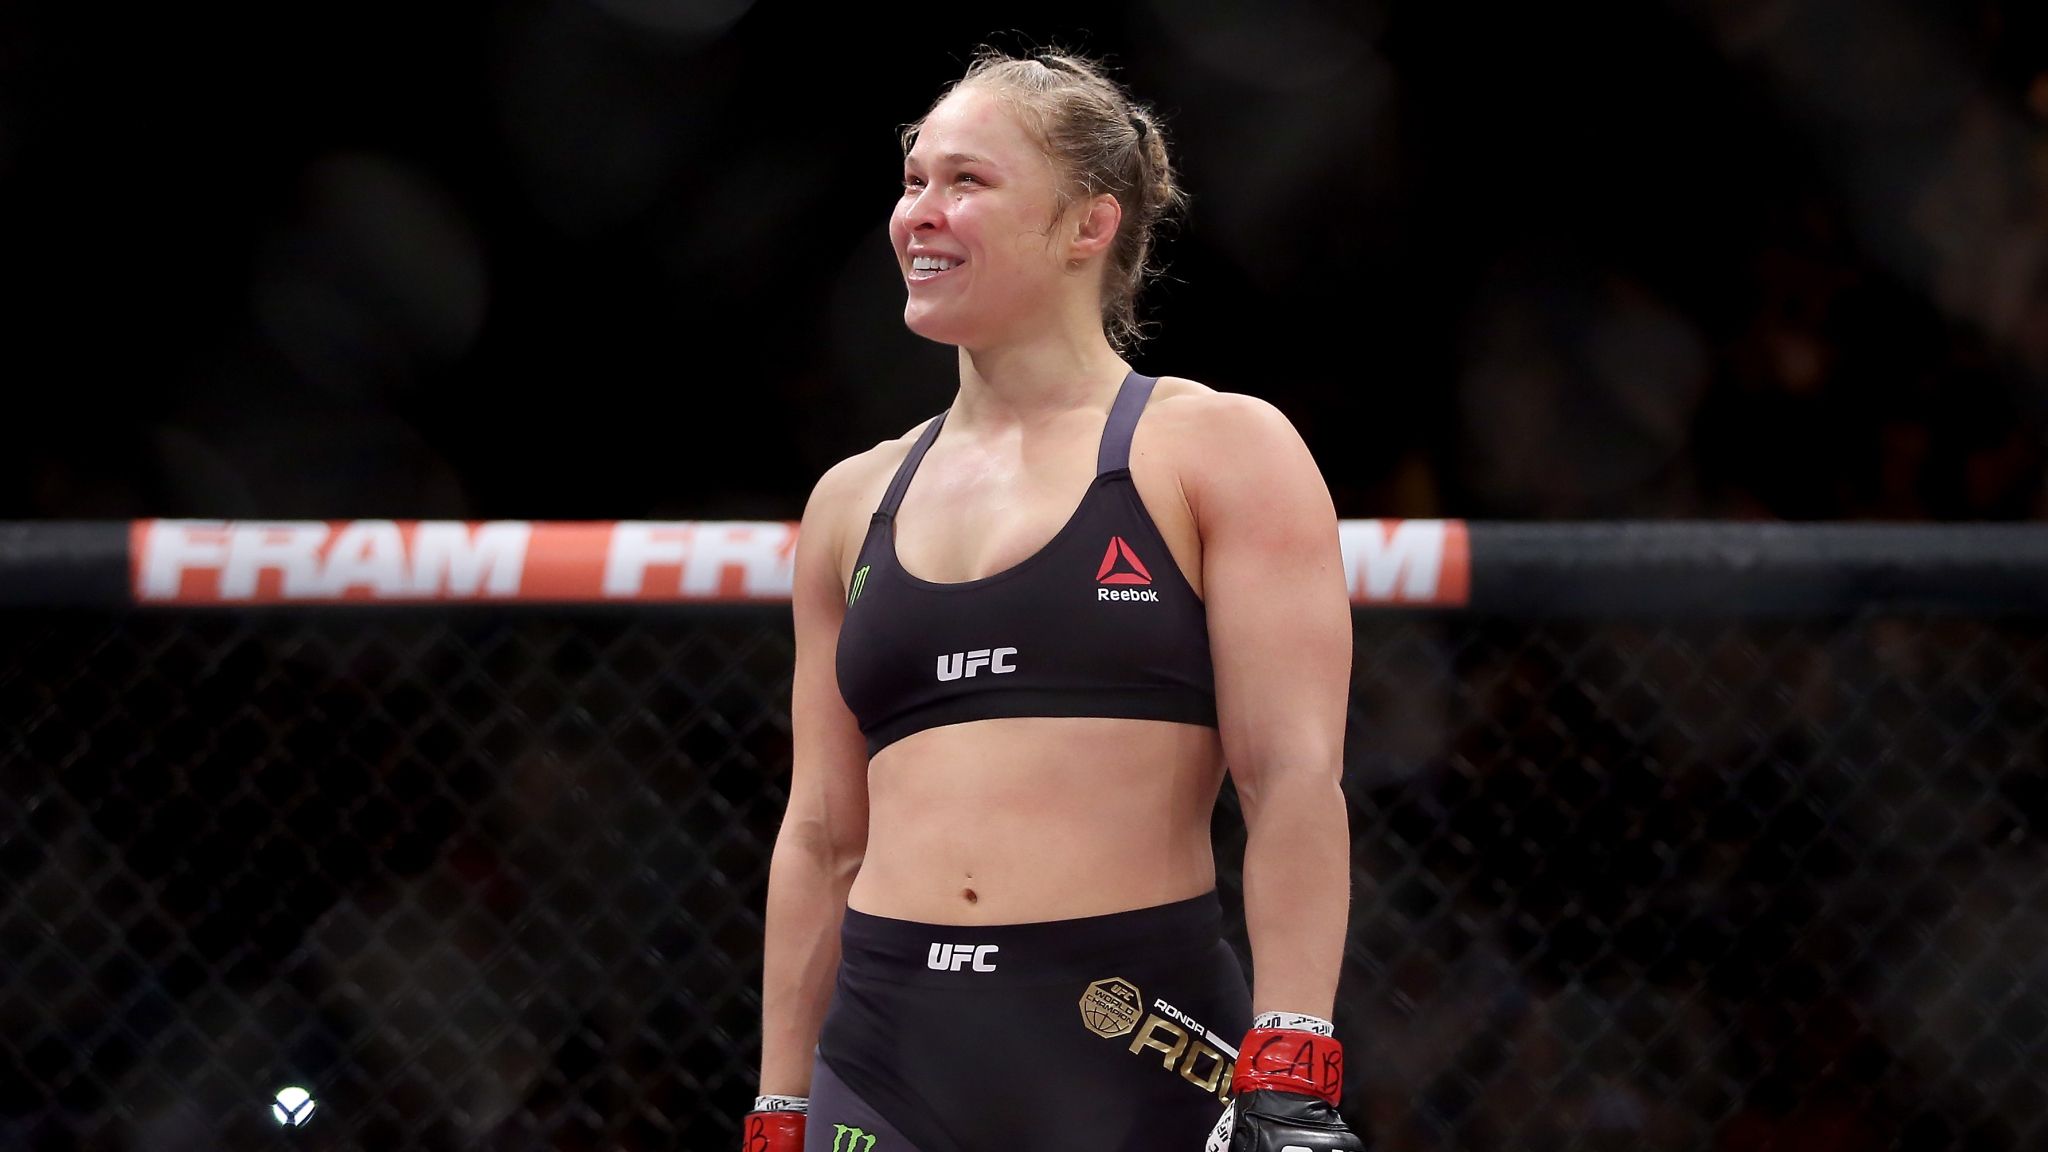 Ronda Rousey wins in just 34 seconds at UFC 190 in Rio, WWE News